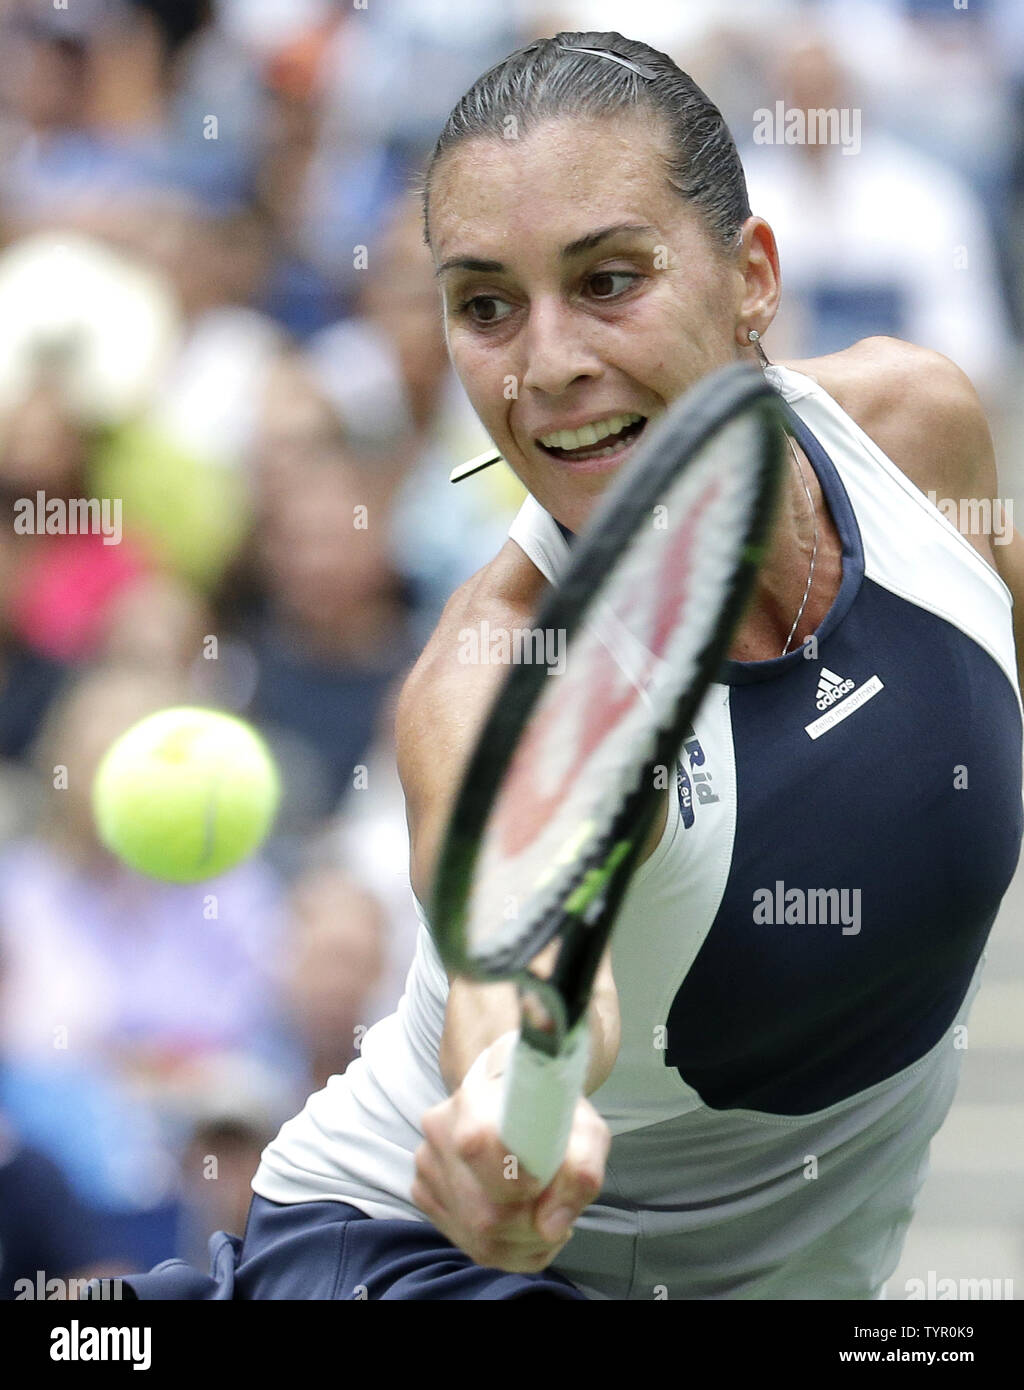 Flavia Pennetta of Italy hits a backhand to Roberta Vinci of Italy in the Women's Final in Arthur Ashe Stadium at the US Open Tennis Championships at the USTA Billie Jean King National Tennis Center in New York City on September 12, 2015. Pennetta wins the match 7-6, 6-2 becoming the first Italian women to win a US Open and also announced her retirement at the Trophy Ceremony.      Photo by John Angelillo/UPI Stock Photo